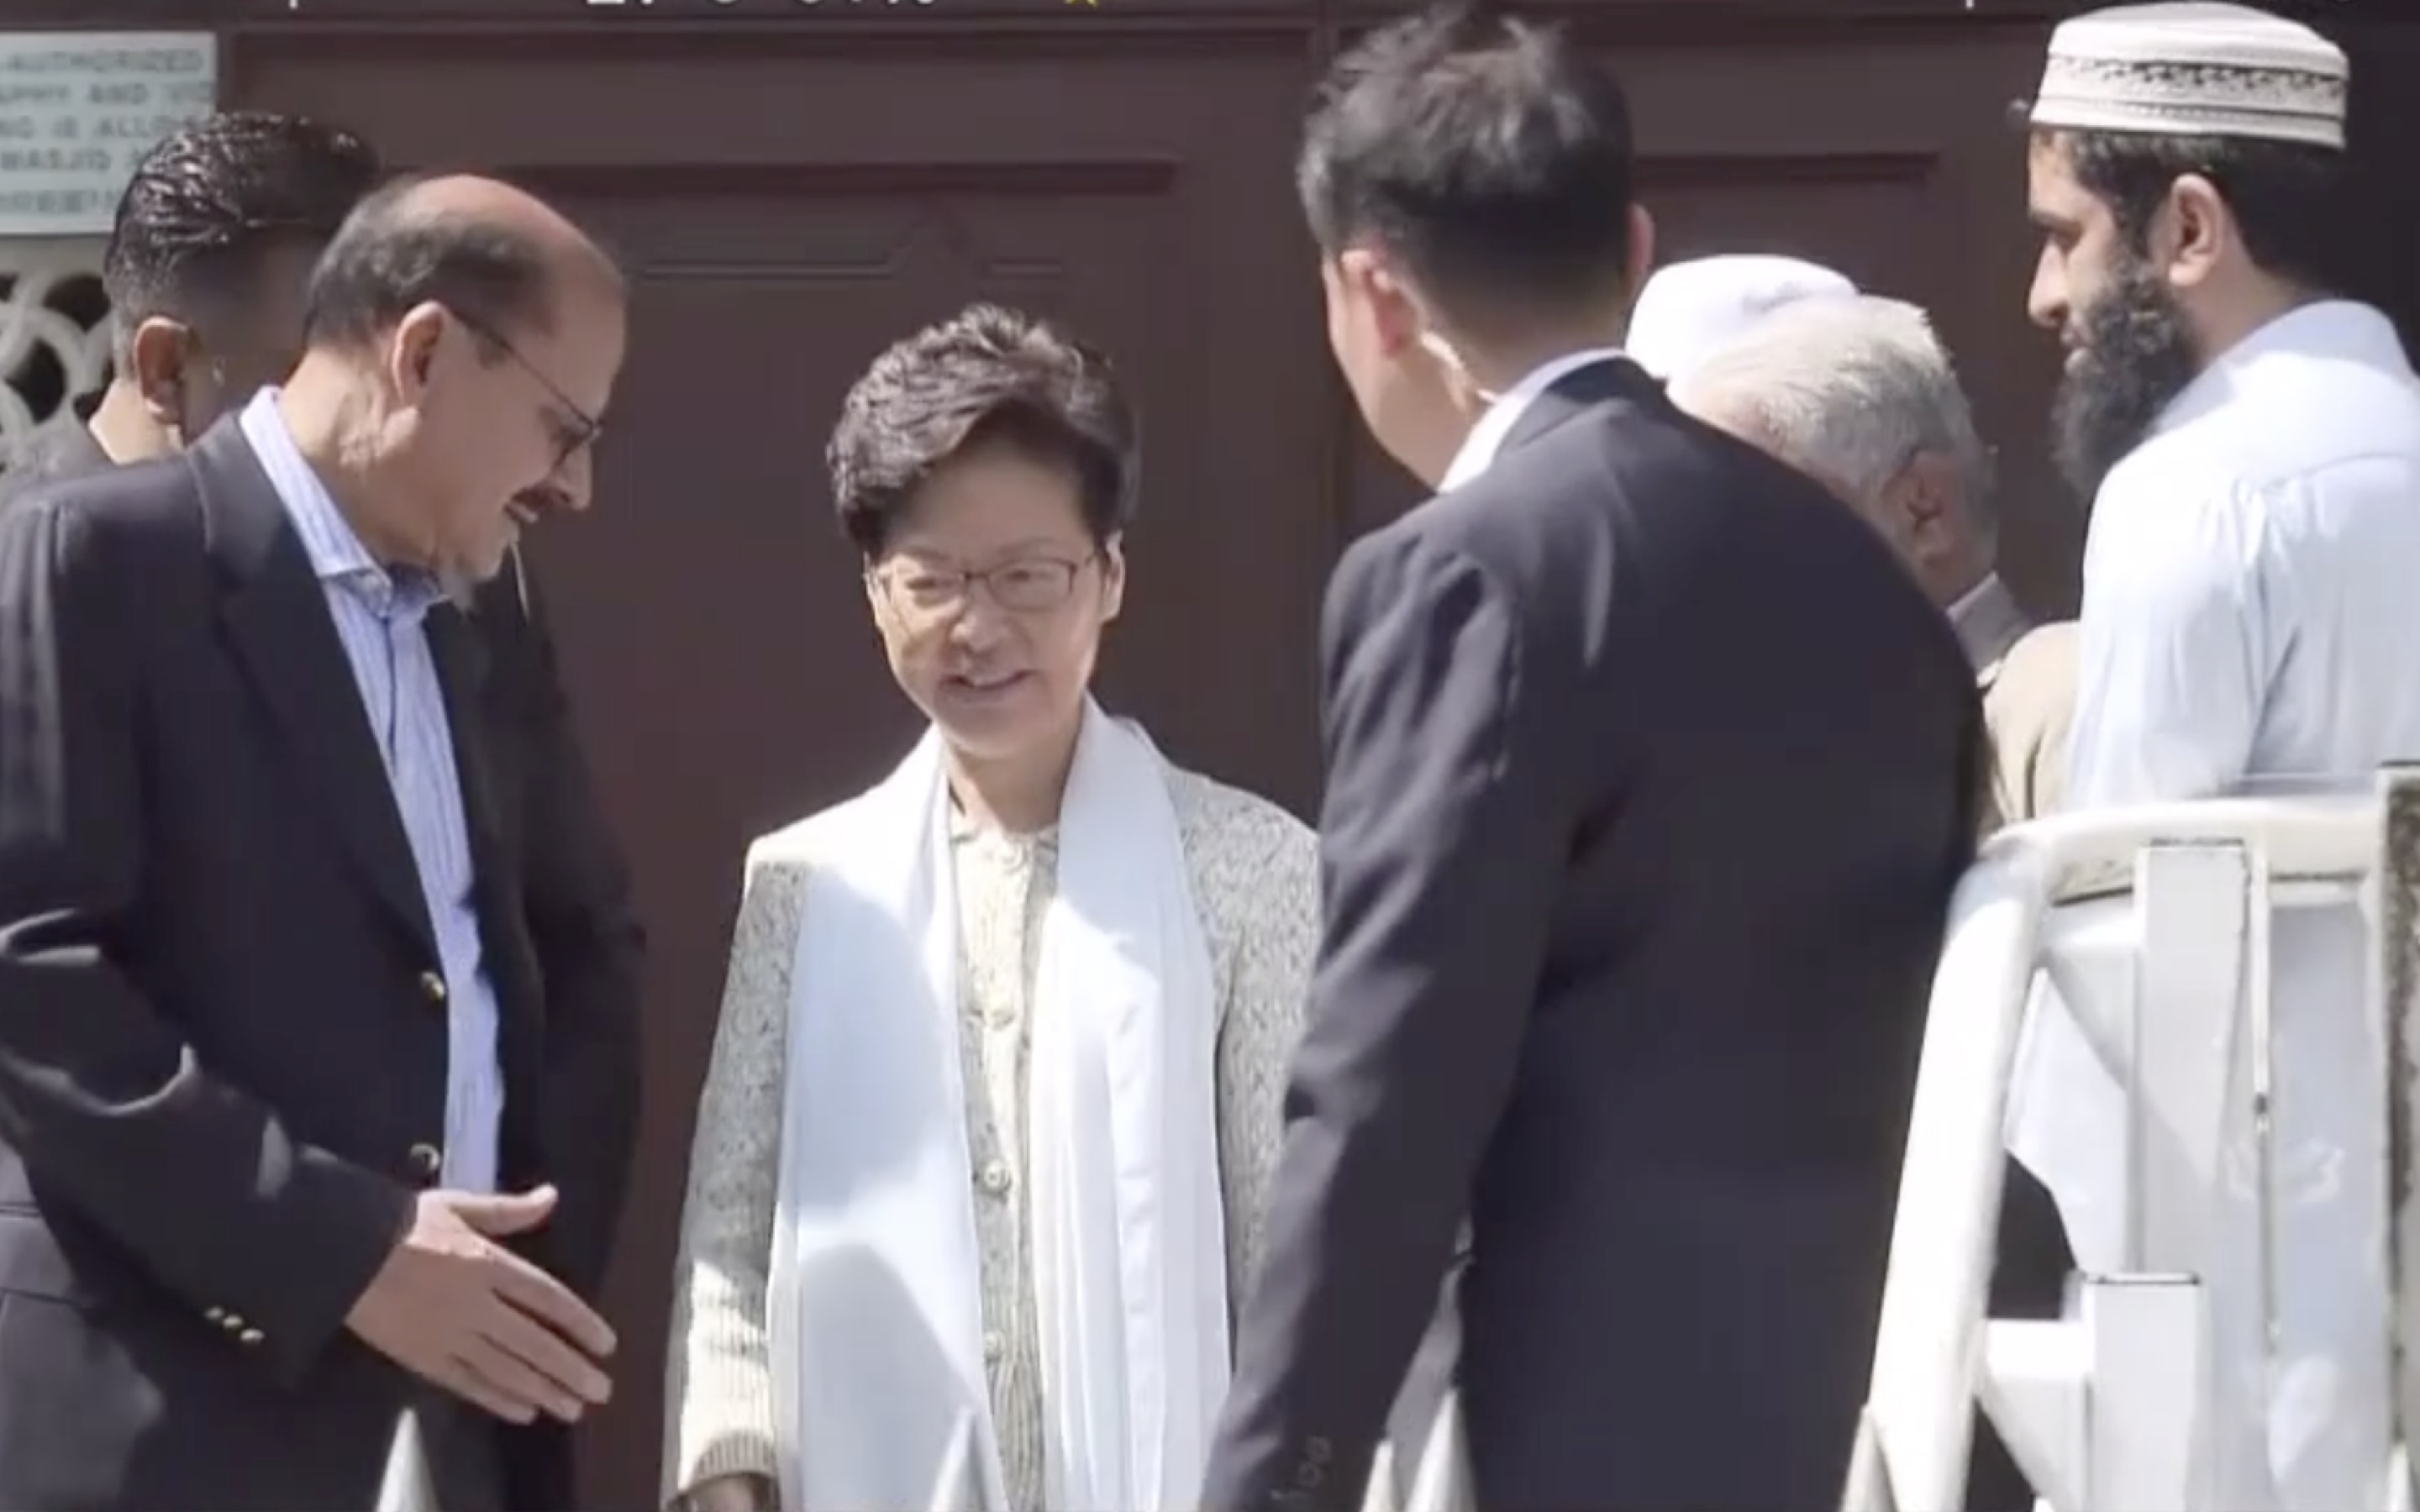 Carrie Lam leaving Kowloon Mosque after a chat with hief imam Muhammad Arshad. The visit comes one day after a police water cannon covered the mosque in blue dye. Screengrab via Facebook/Now TV News.